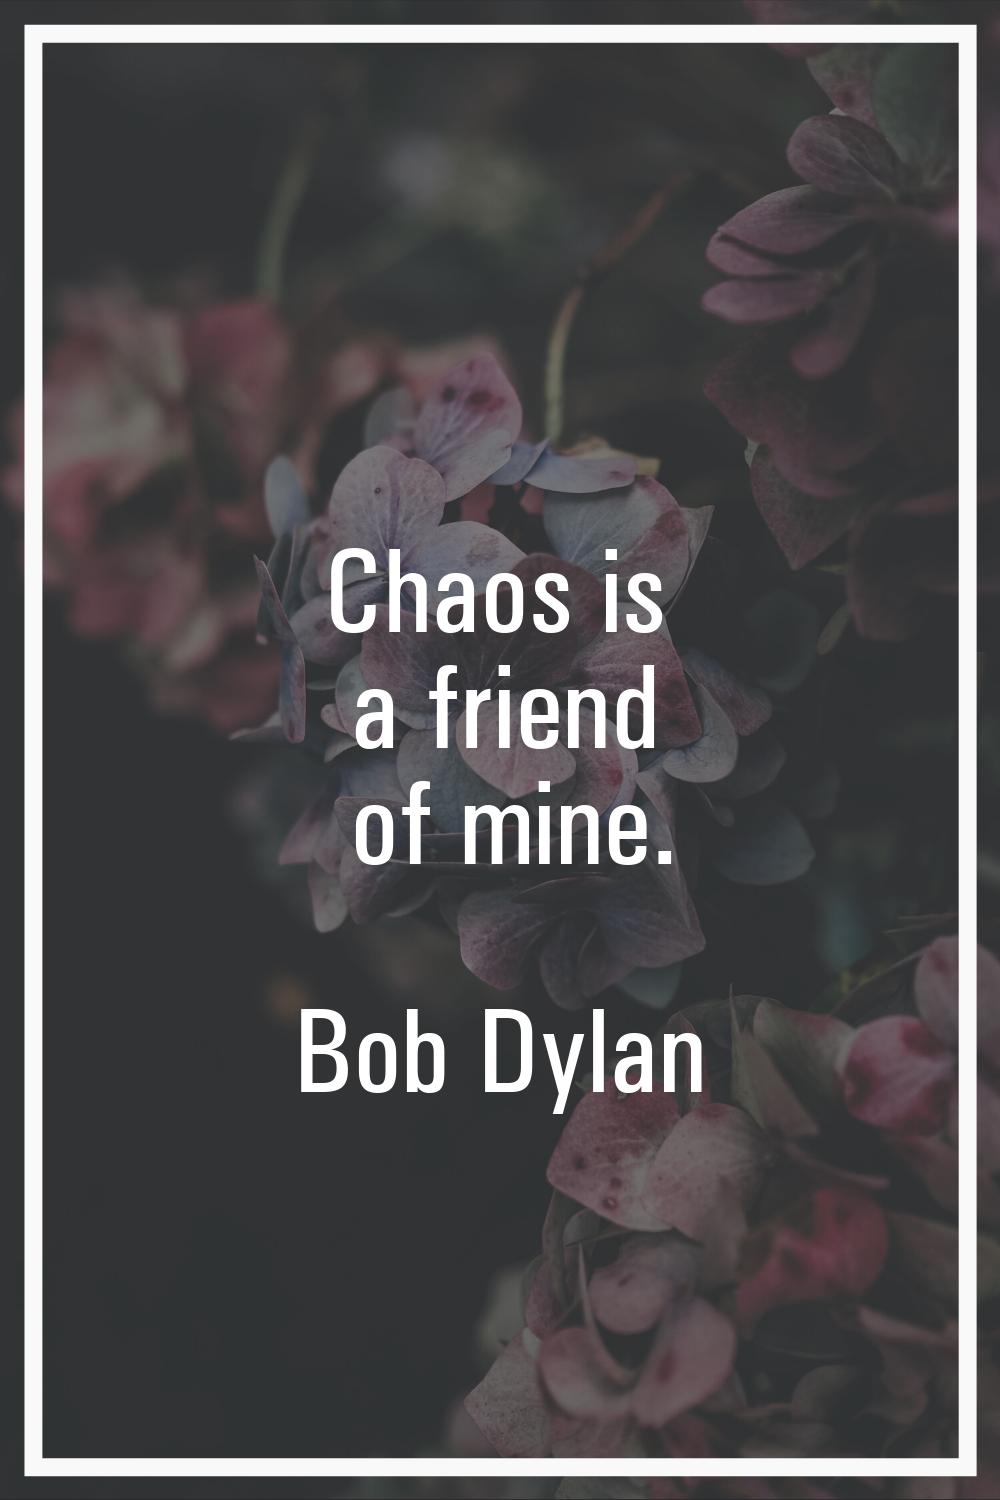 Chaos is a friend of mine.